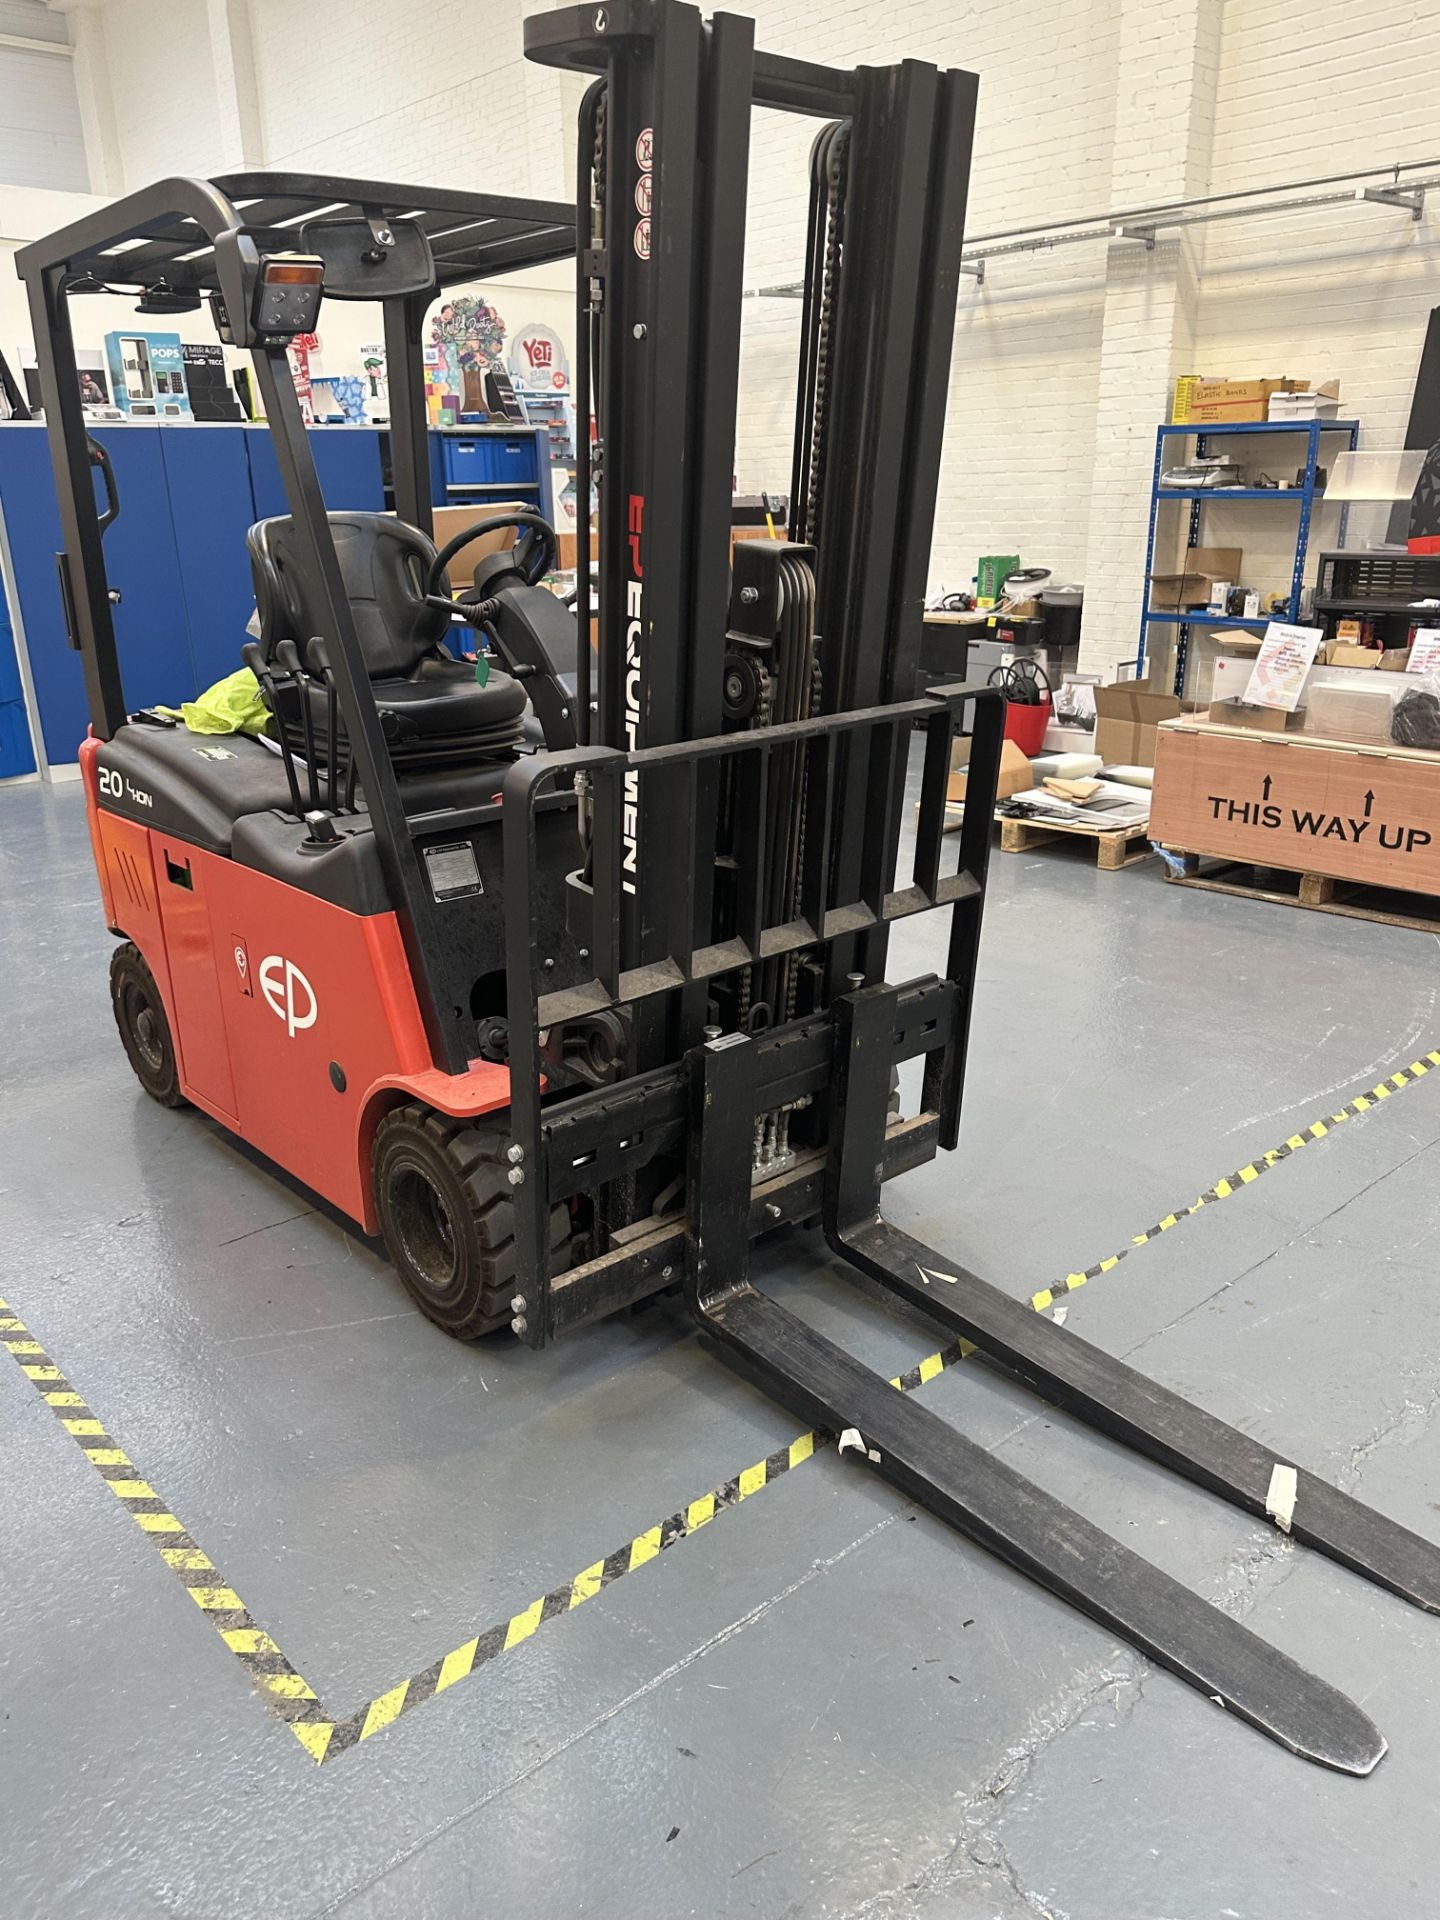 EP 2T Electric Forklift Truck w/Charger | CPD20LI | Located at Whitefield - Bild 2 aus 4